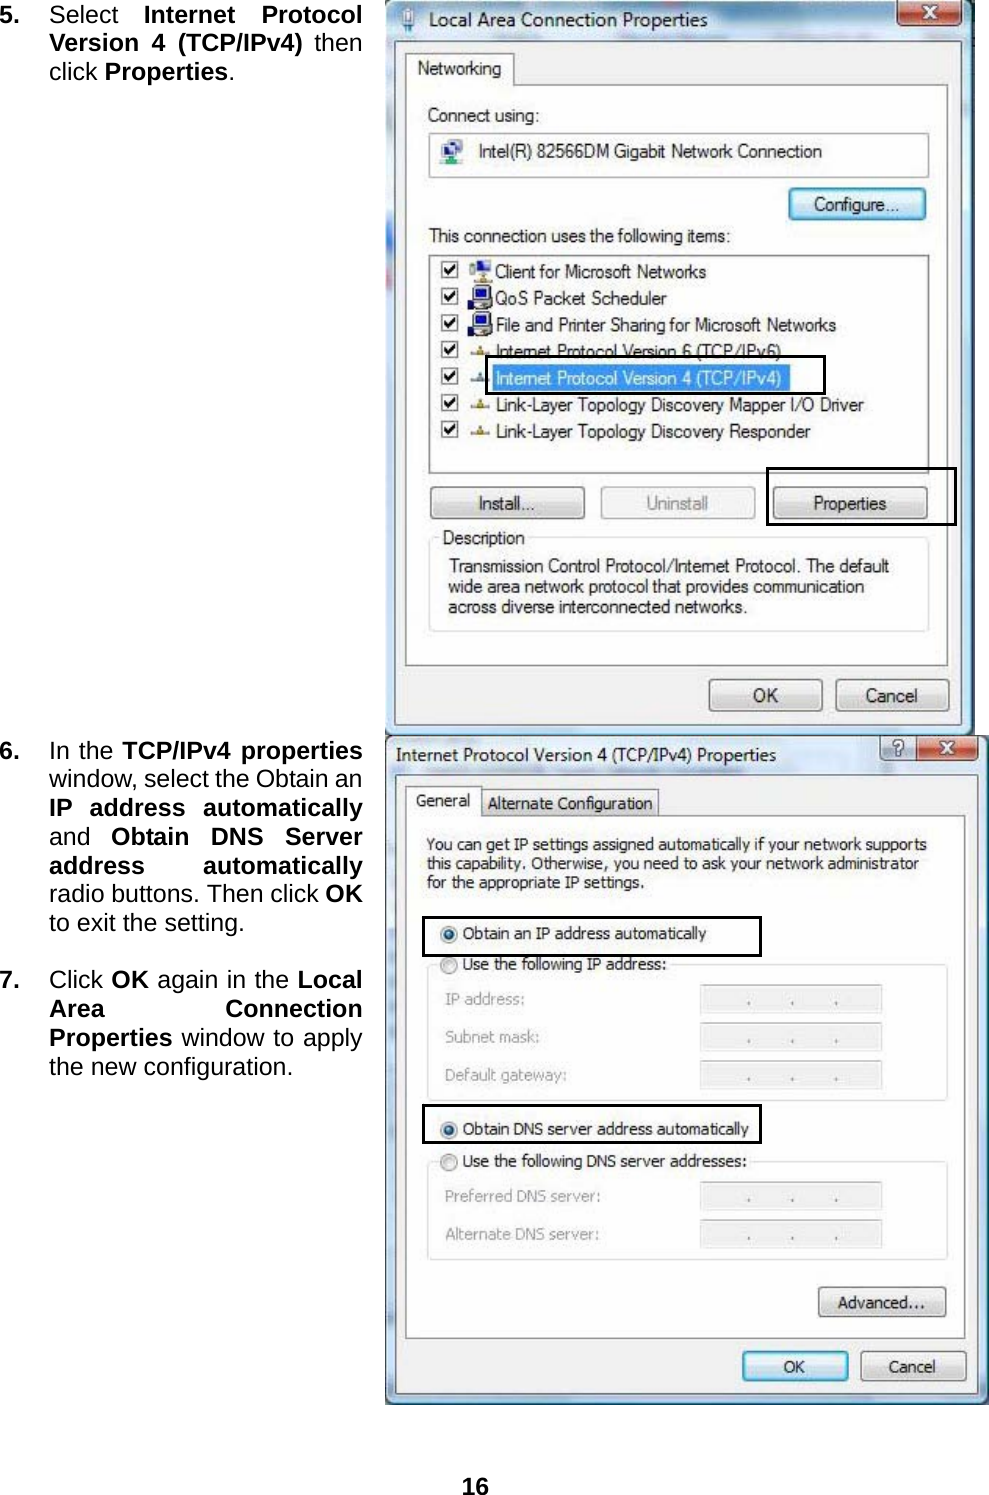  16  5.  Select  Internet Protocol Version 4 (TCP/IPv4) then click Properties.  6.  In the TCP/IPv4 properties window, select the Obtain an IP address automatically and  Obtain DNS Server address automatically radio buttons. Then click OK to exit the setting.  7.  Click OK again in the Local Area Connection Properties window to apply the new configuration. 